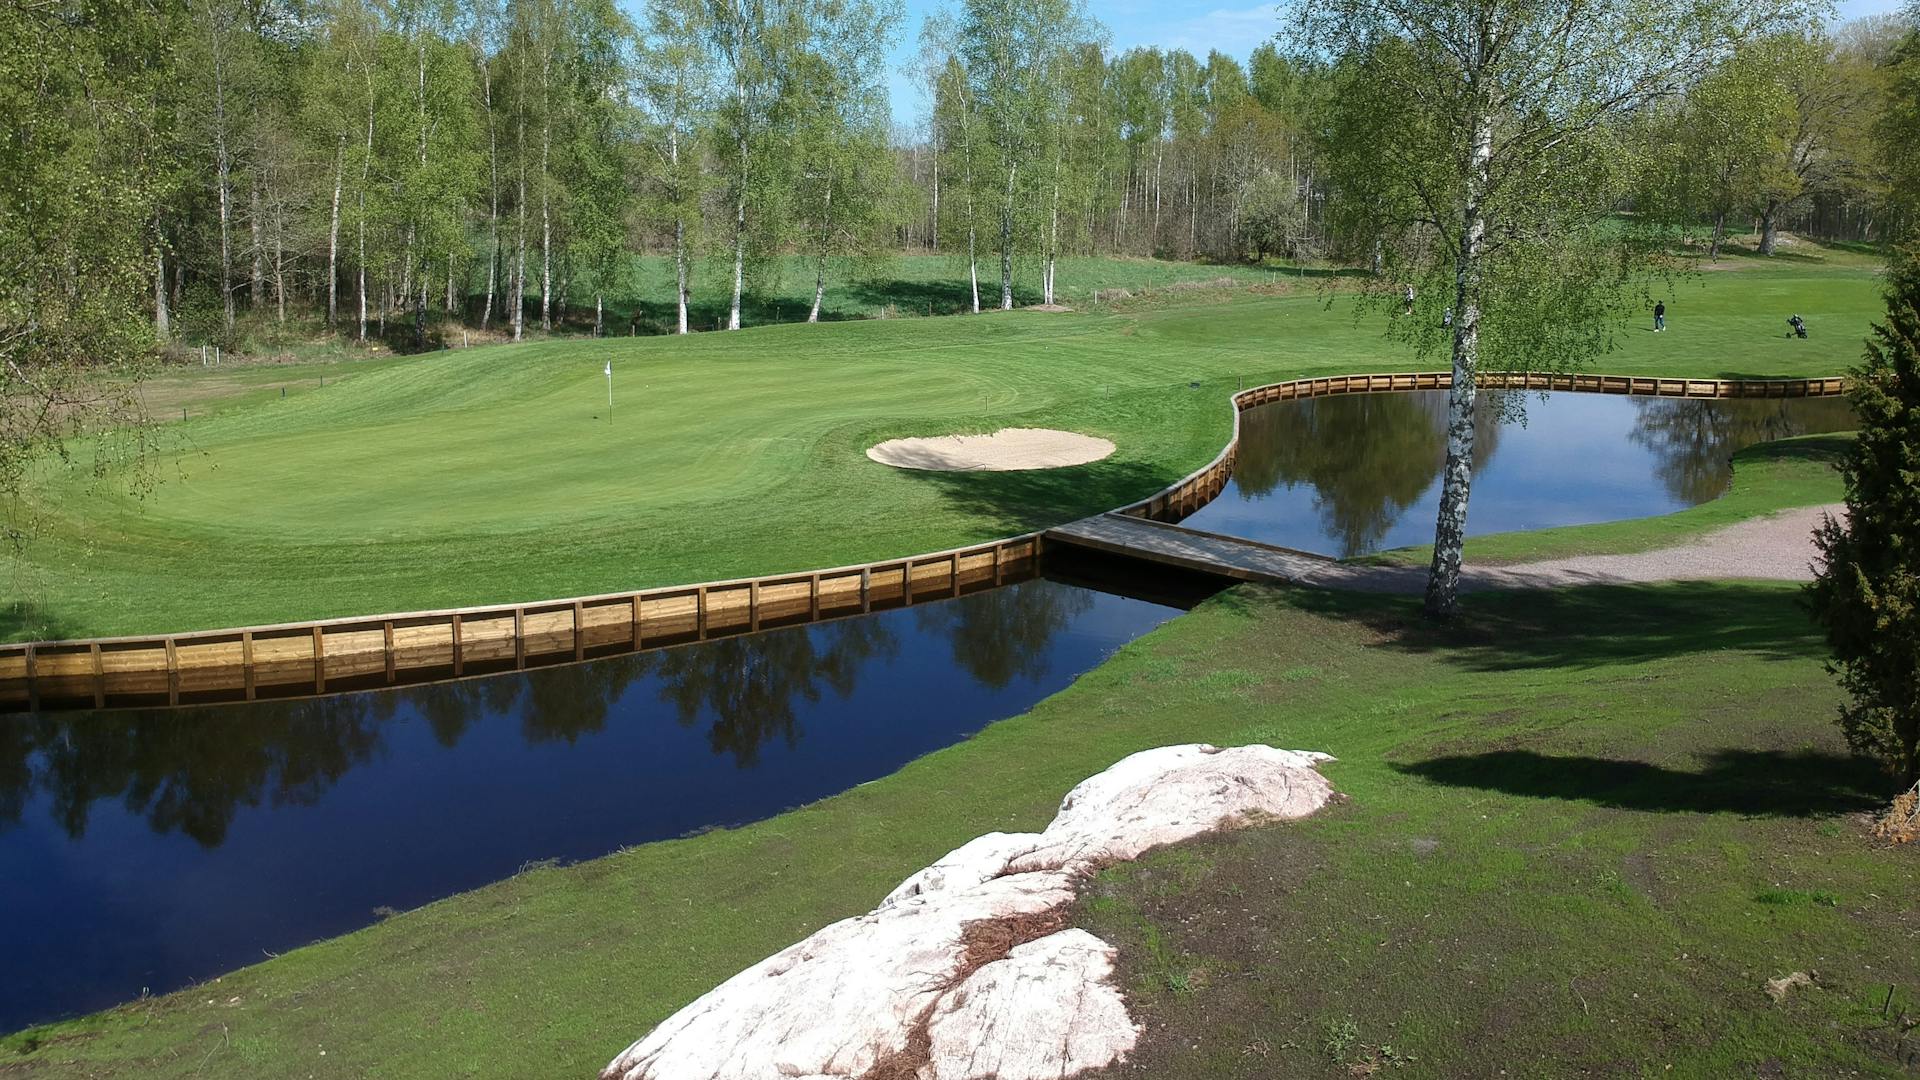 A development plan made in collaboration with Swedish professional golfer, Pierre Fulke, in 2015 has resulted in 3 new holes, 5 new green areas, and 14 renovated tees. Source: Oskarshamns GolfKlubb 